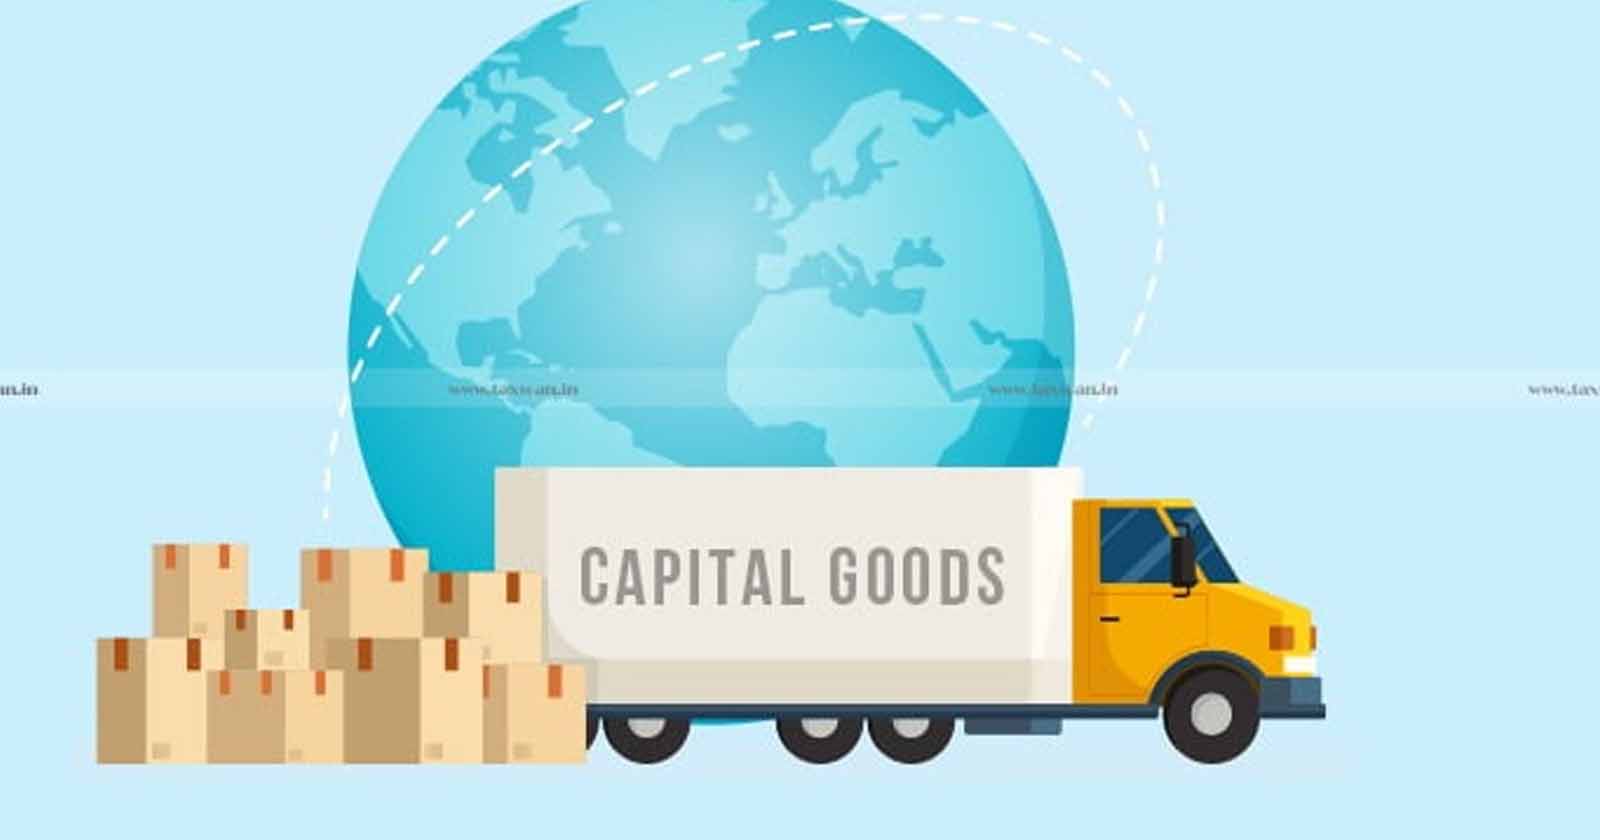 CCR - CESTAT - Capital Goods - CCR cannot be applied Retrospectively to Capital Goods - Goods - taxscan